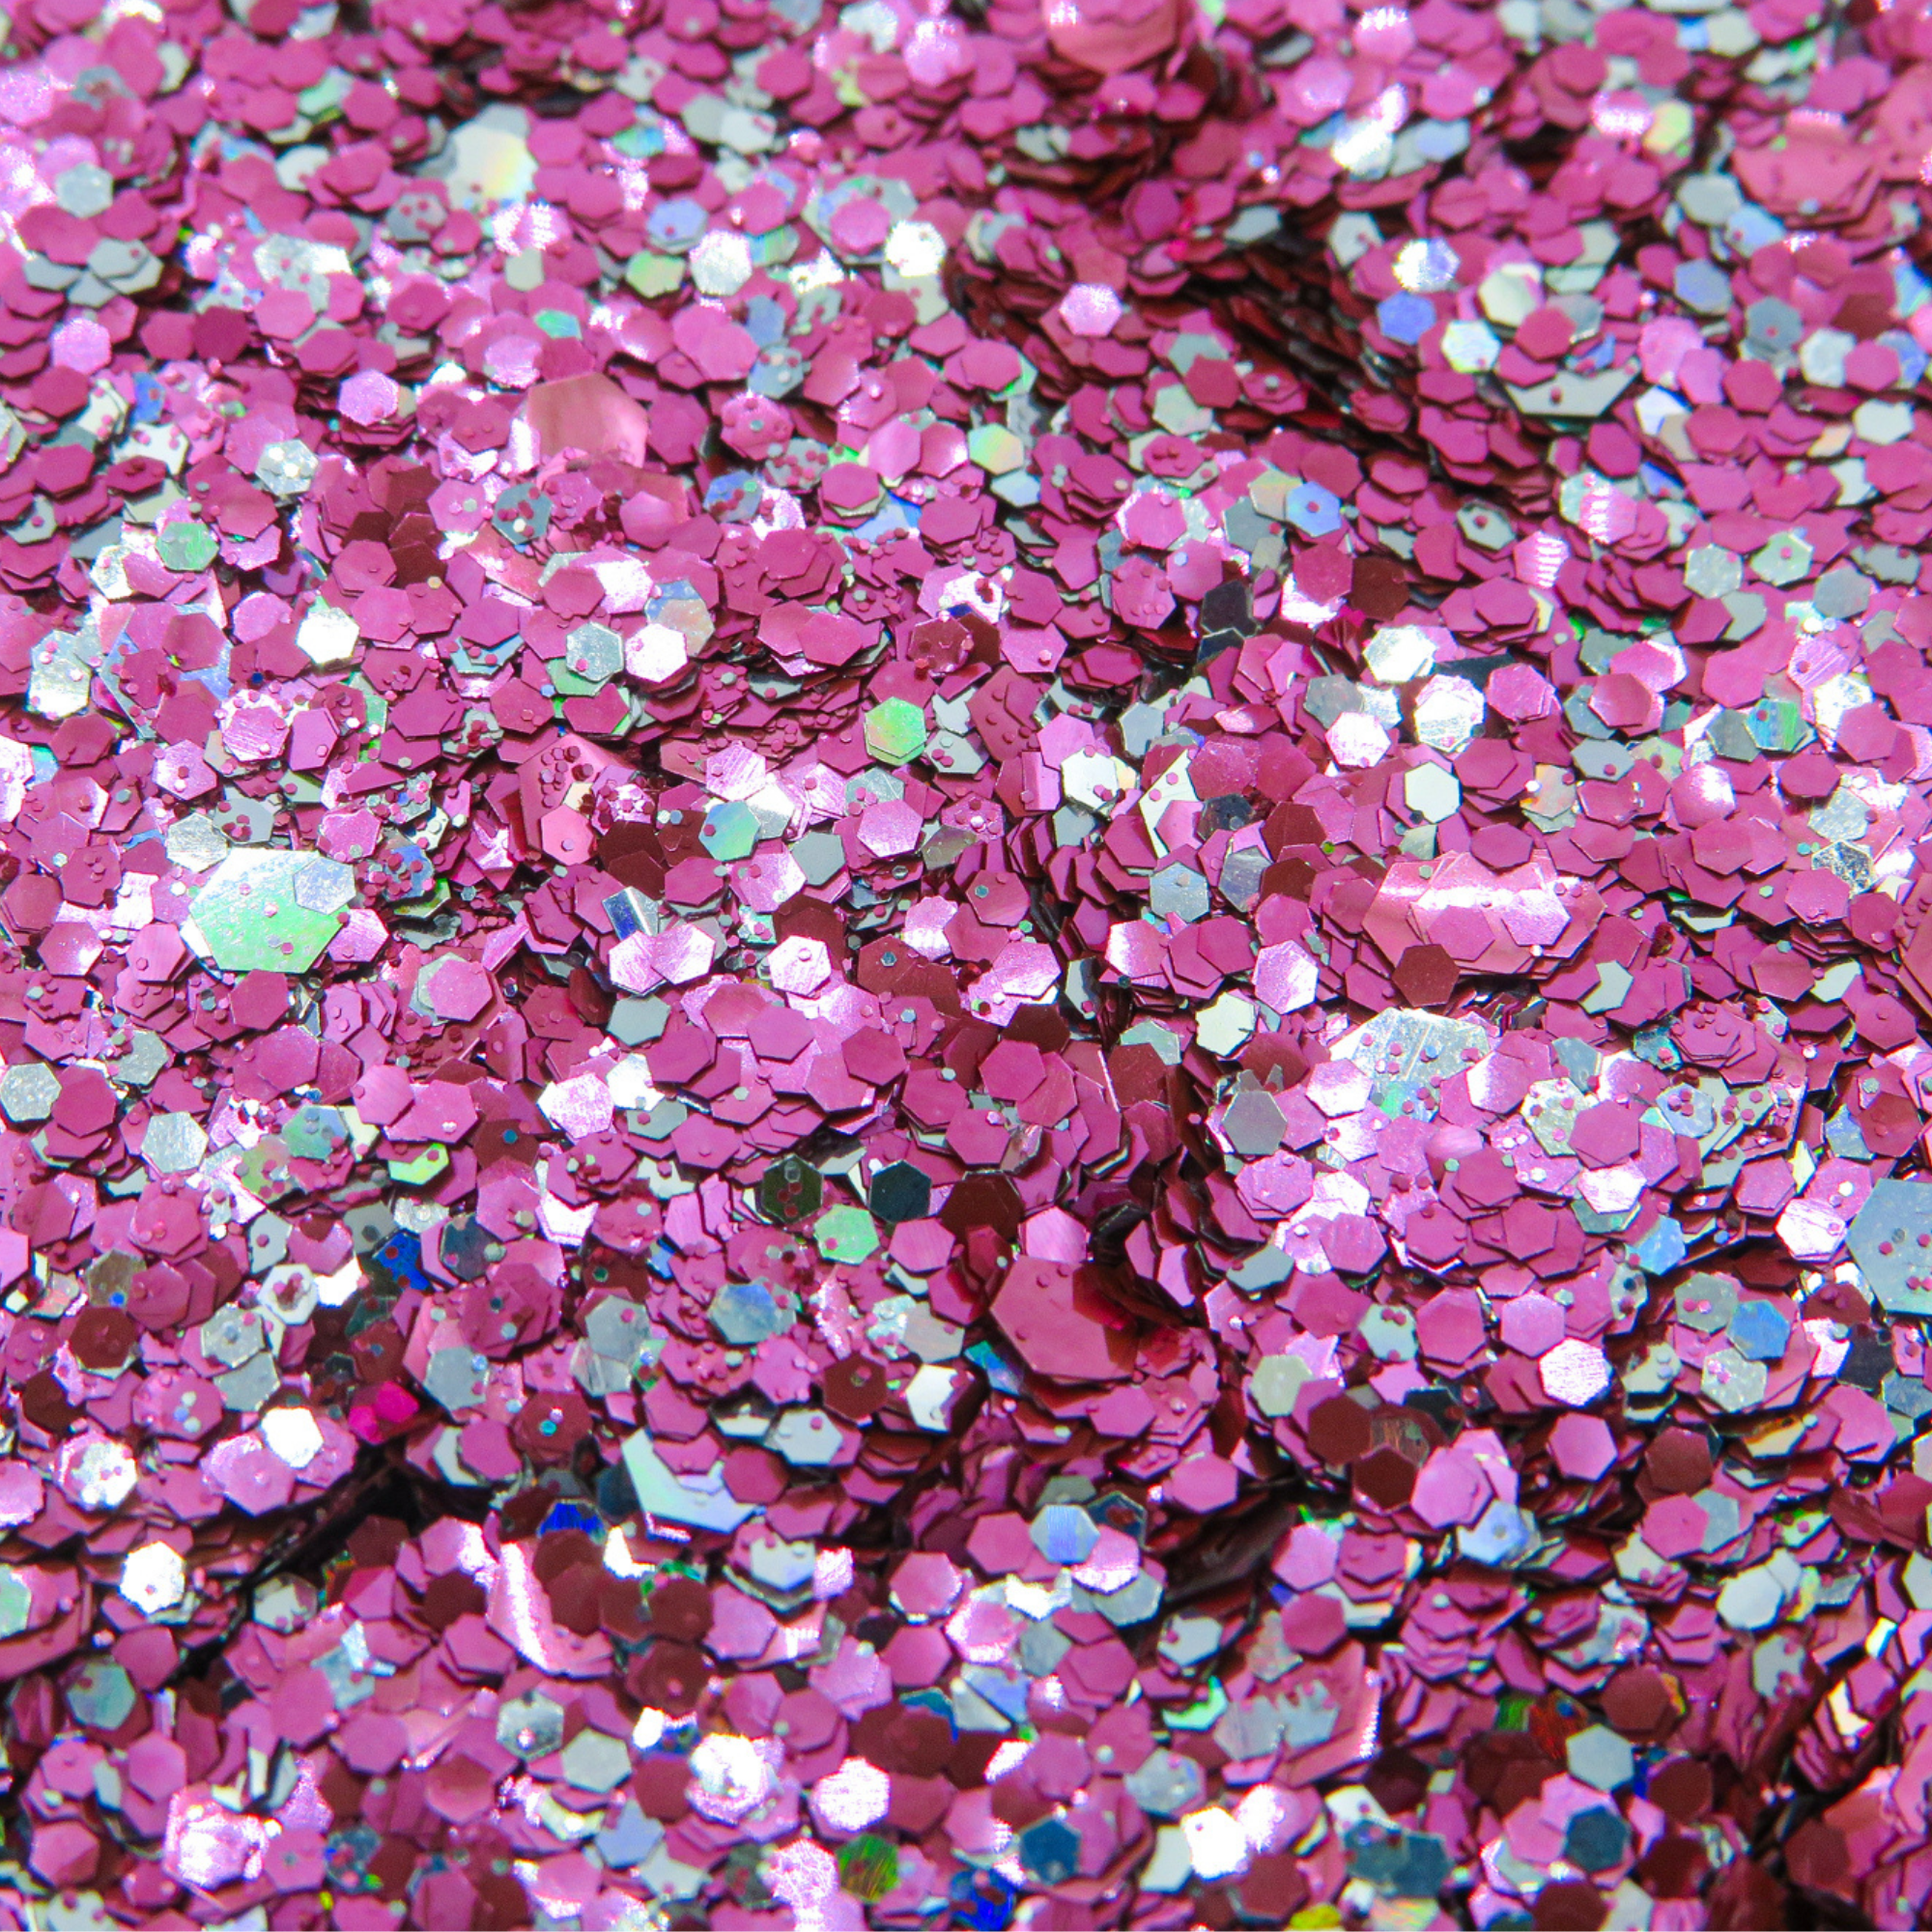 Pink unicorn eco glitter mix by Luminosity Glitter London. Eco friendly glitter that is proven to biodegrade in a natural freshwater environment in a matter of weeks.